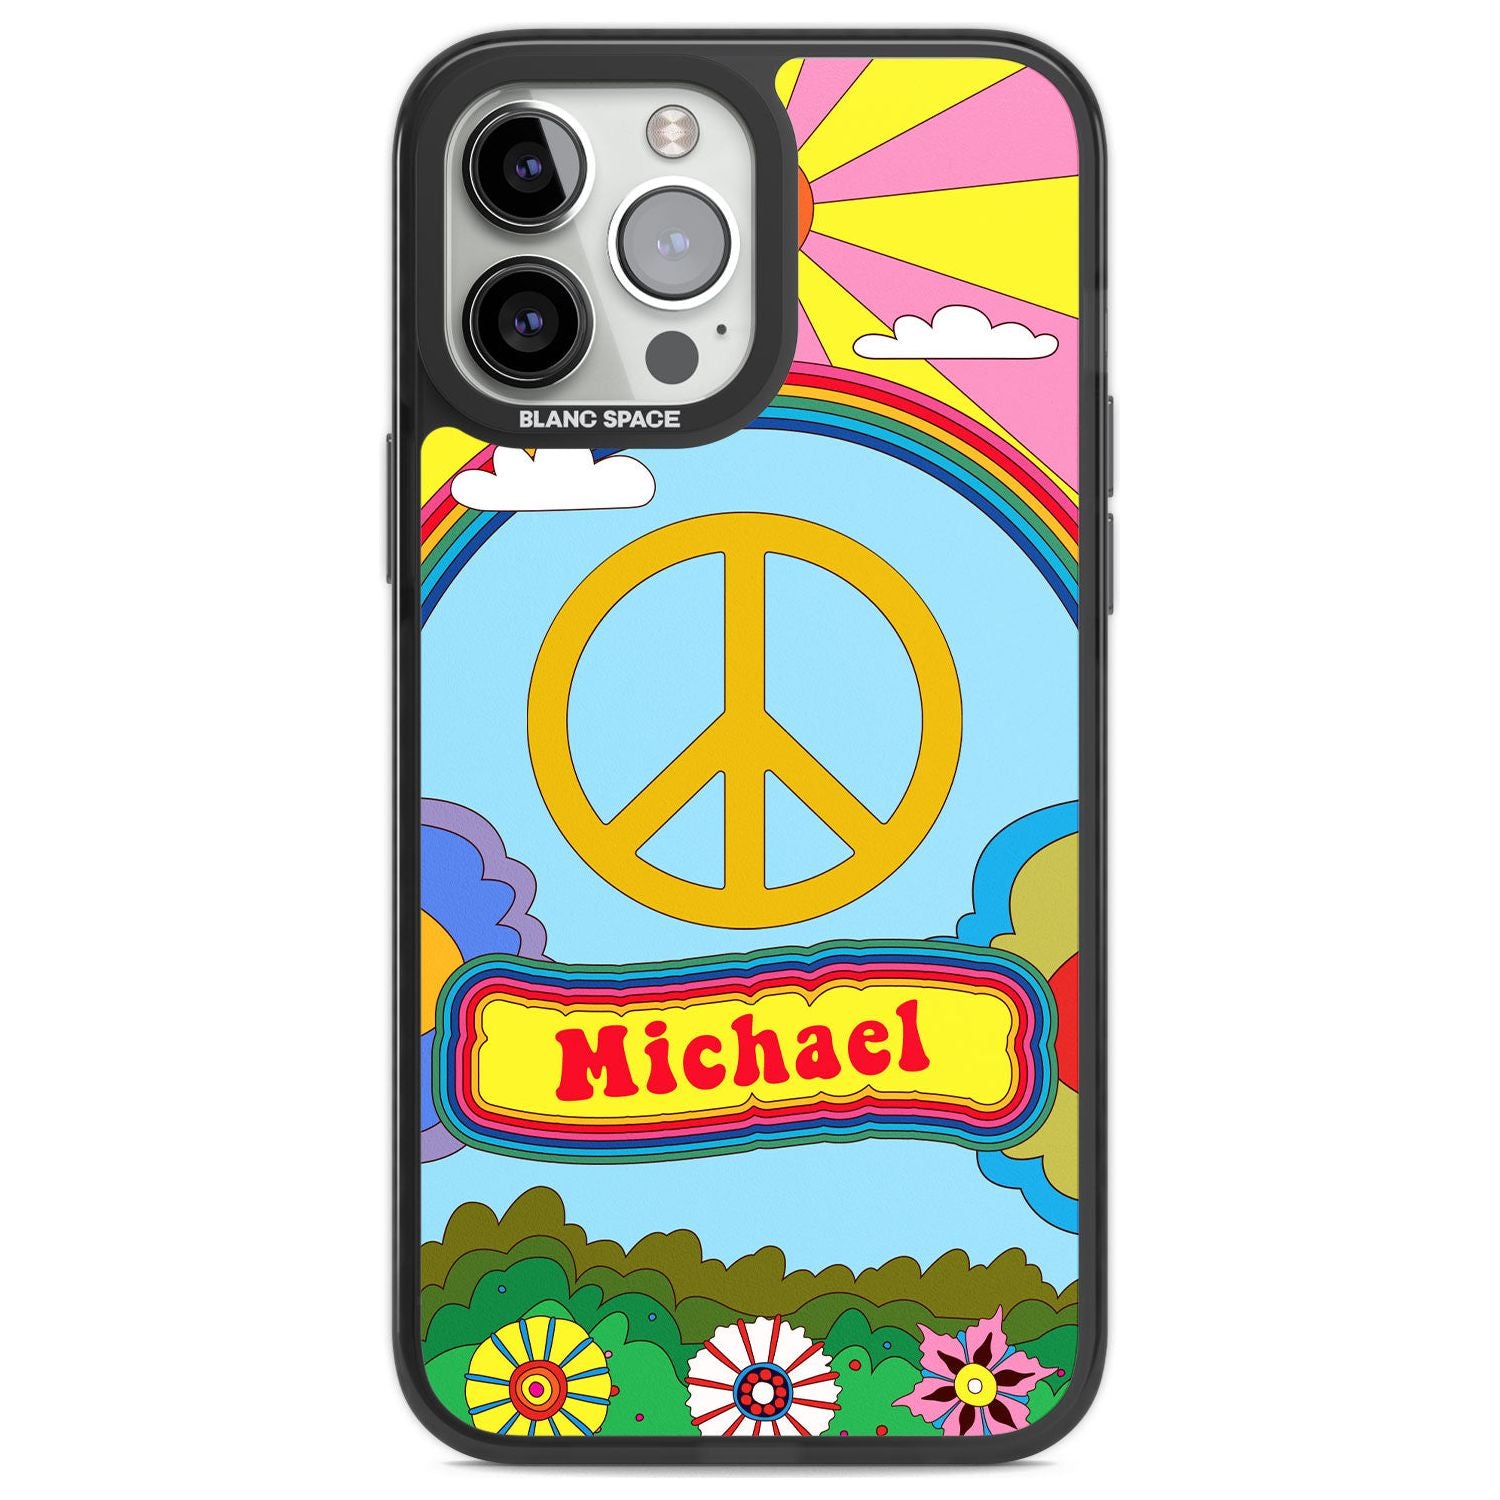 Personalised Happy Days Phone Case iPhone 13 Pro Max / Black Impact Case,iPhone 14 Pro Max / Black Impact Case Blanc Space